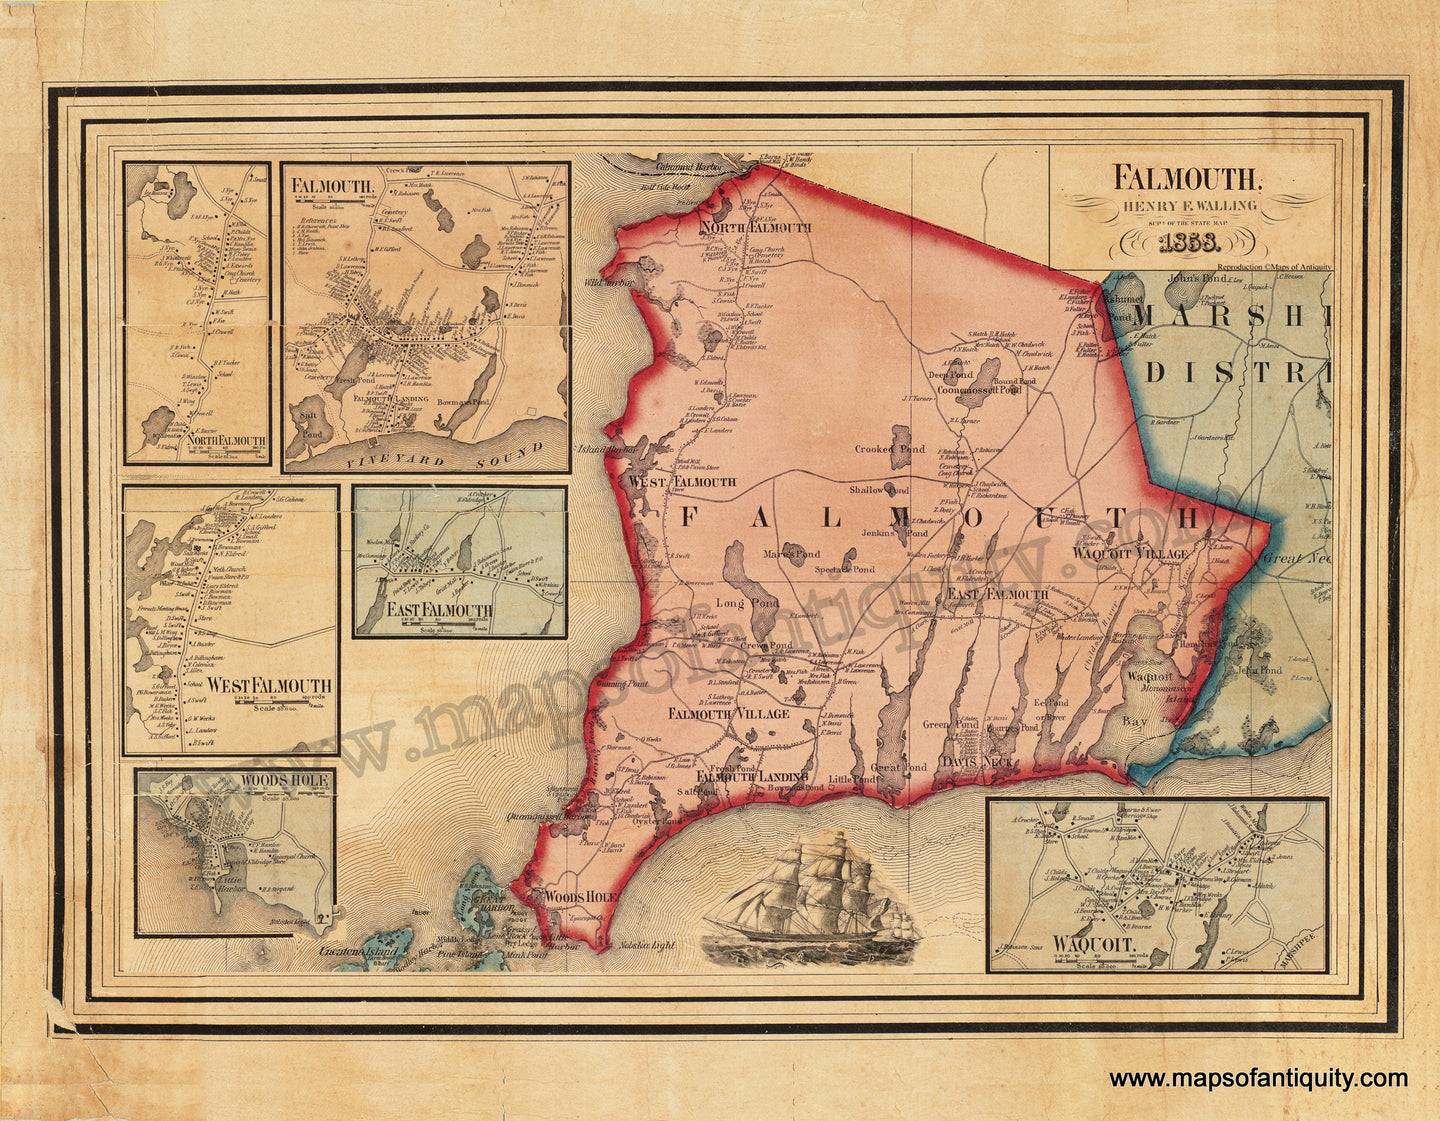 Reproduction-Antique-Map-Falmouth-1858-Walling-Wall-map-Cape-Cod-1850s-1800s-19th-century-Maps-of-Antiquity